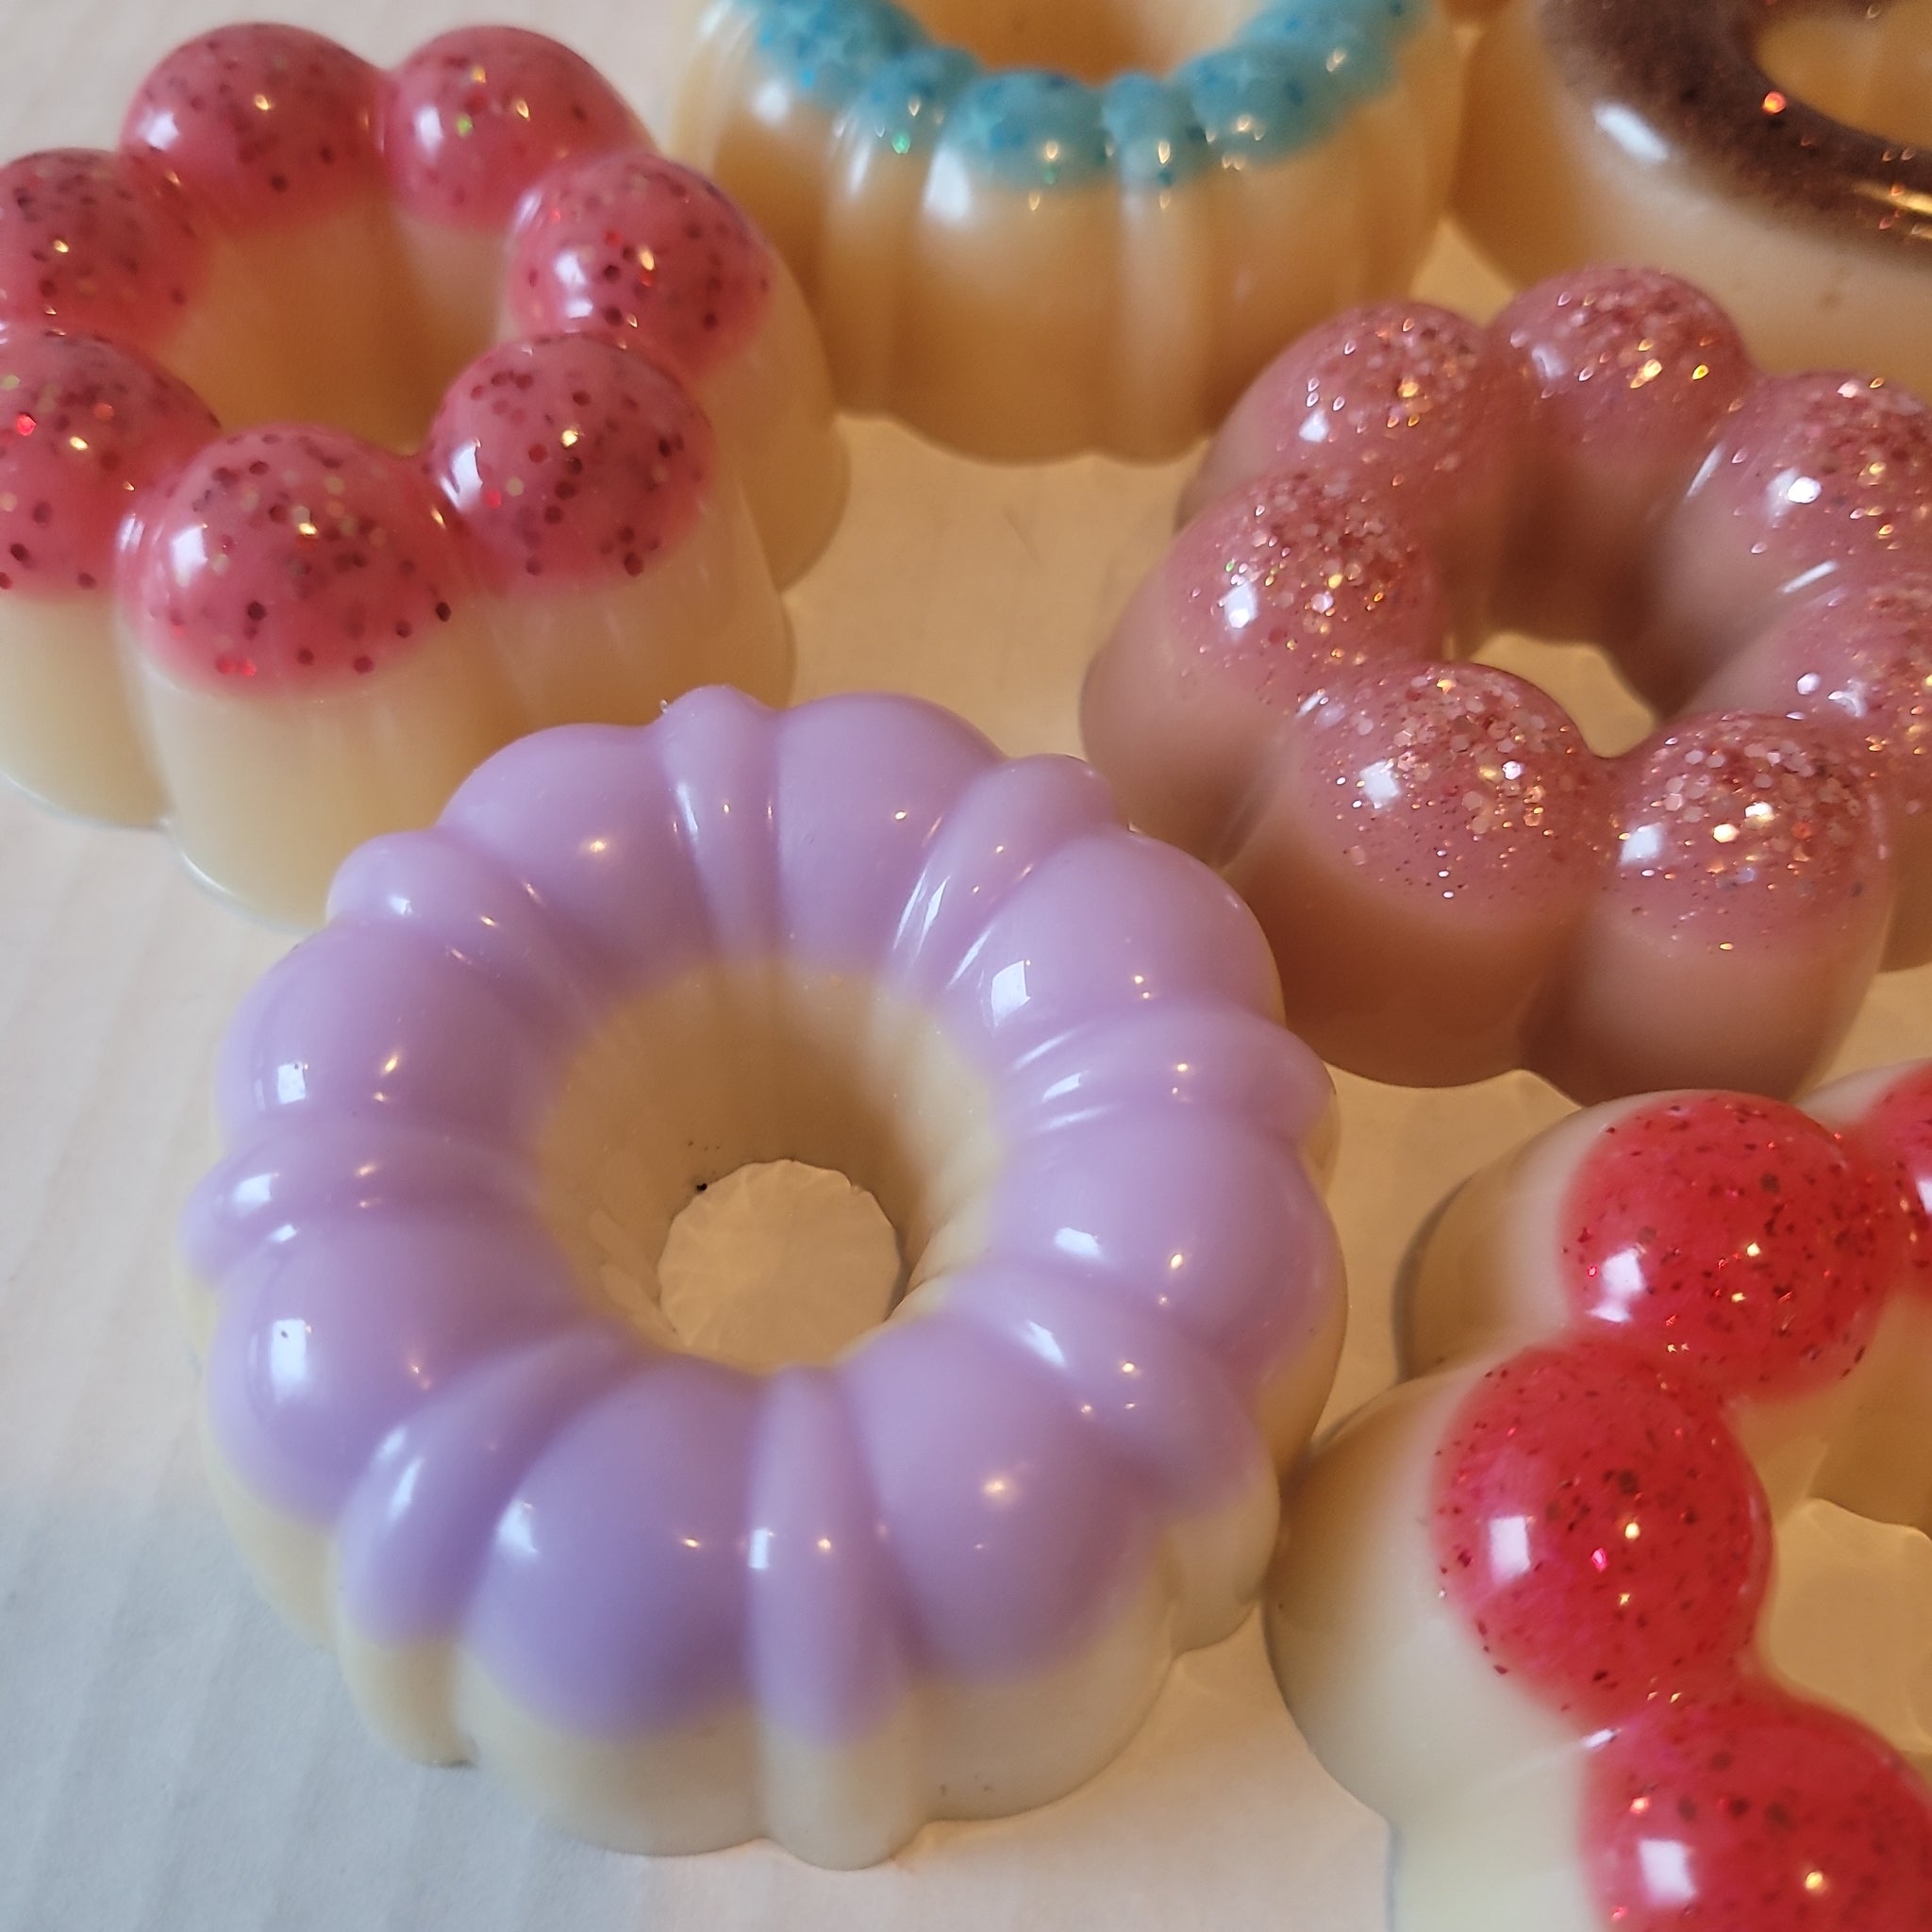 Sweet shoppe Cakes and Donuts